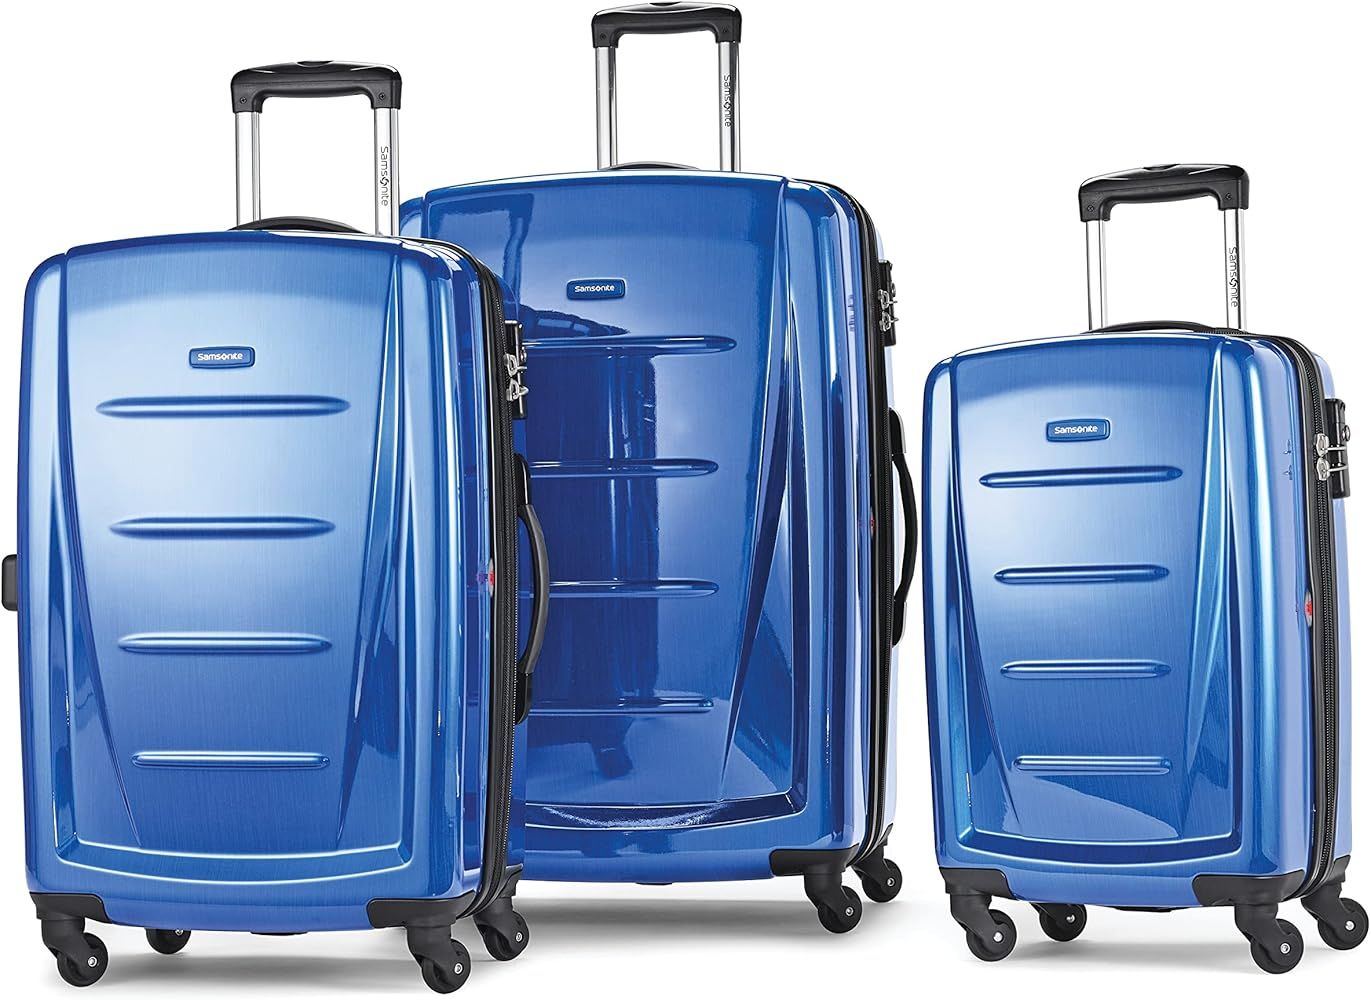 Samsonite Winfield 2 Hardside Expandable Luggage with Spinner Wheels, Nordic Blue, 3-Piece Set (2... | Amazon (US)